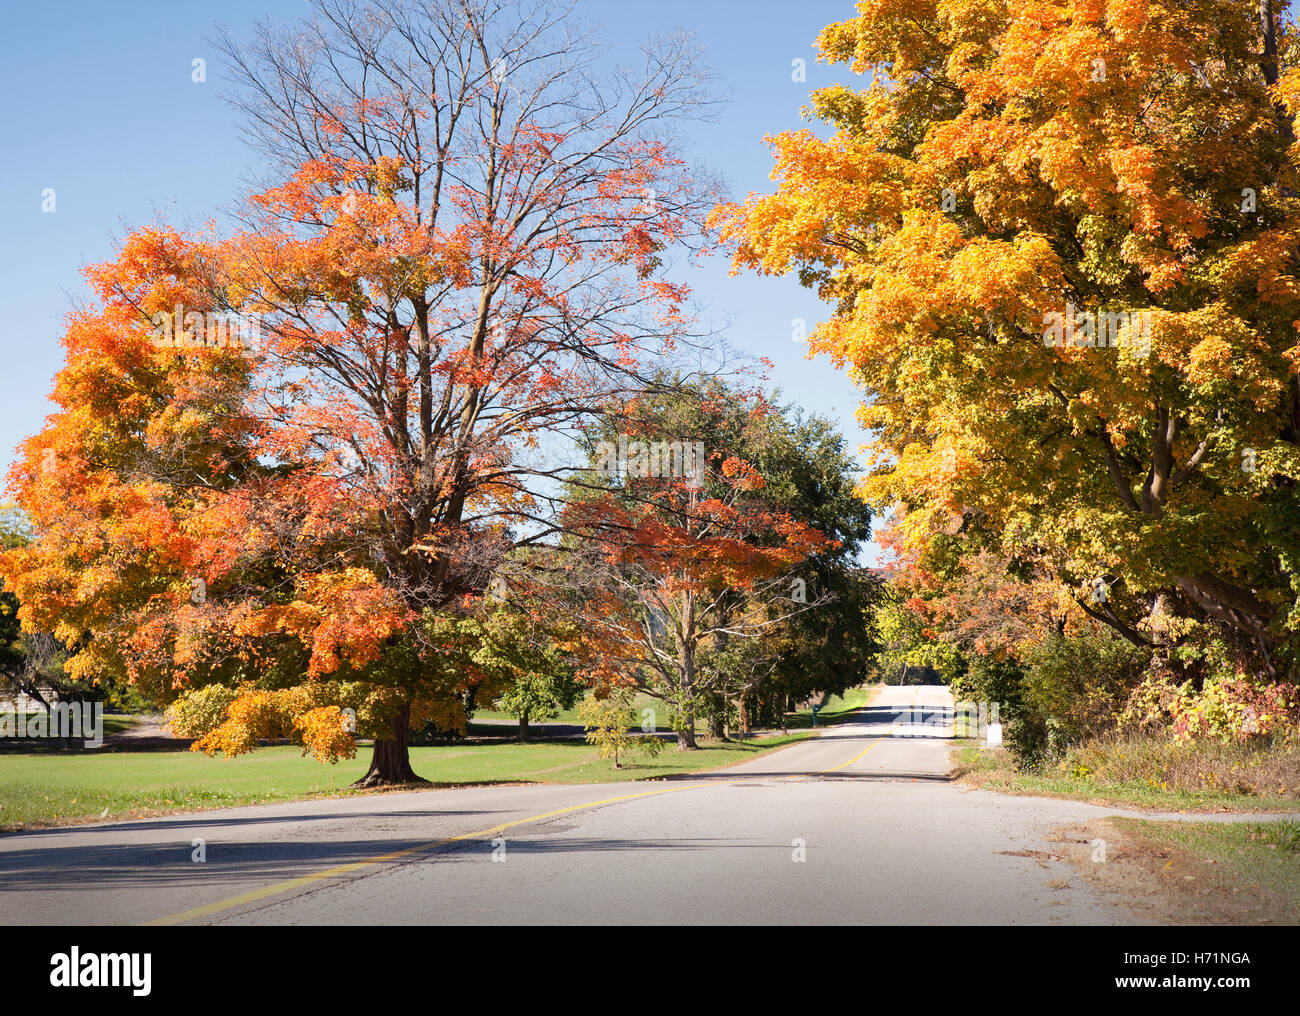 autumn road with colorful trees during autumn fall season Stock Photo